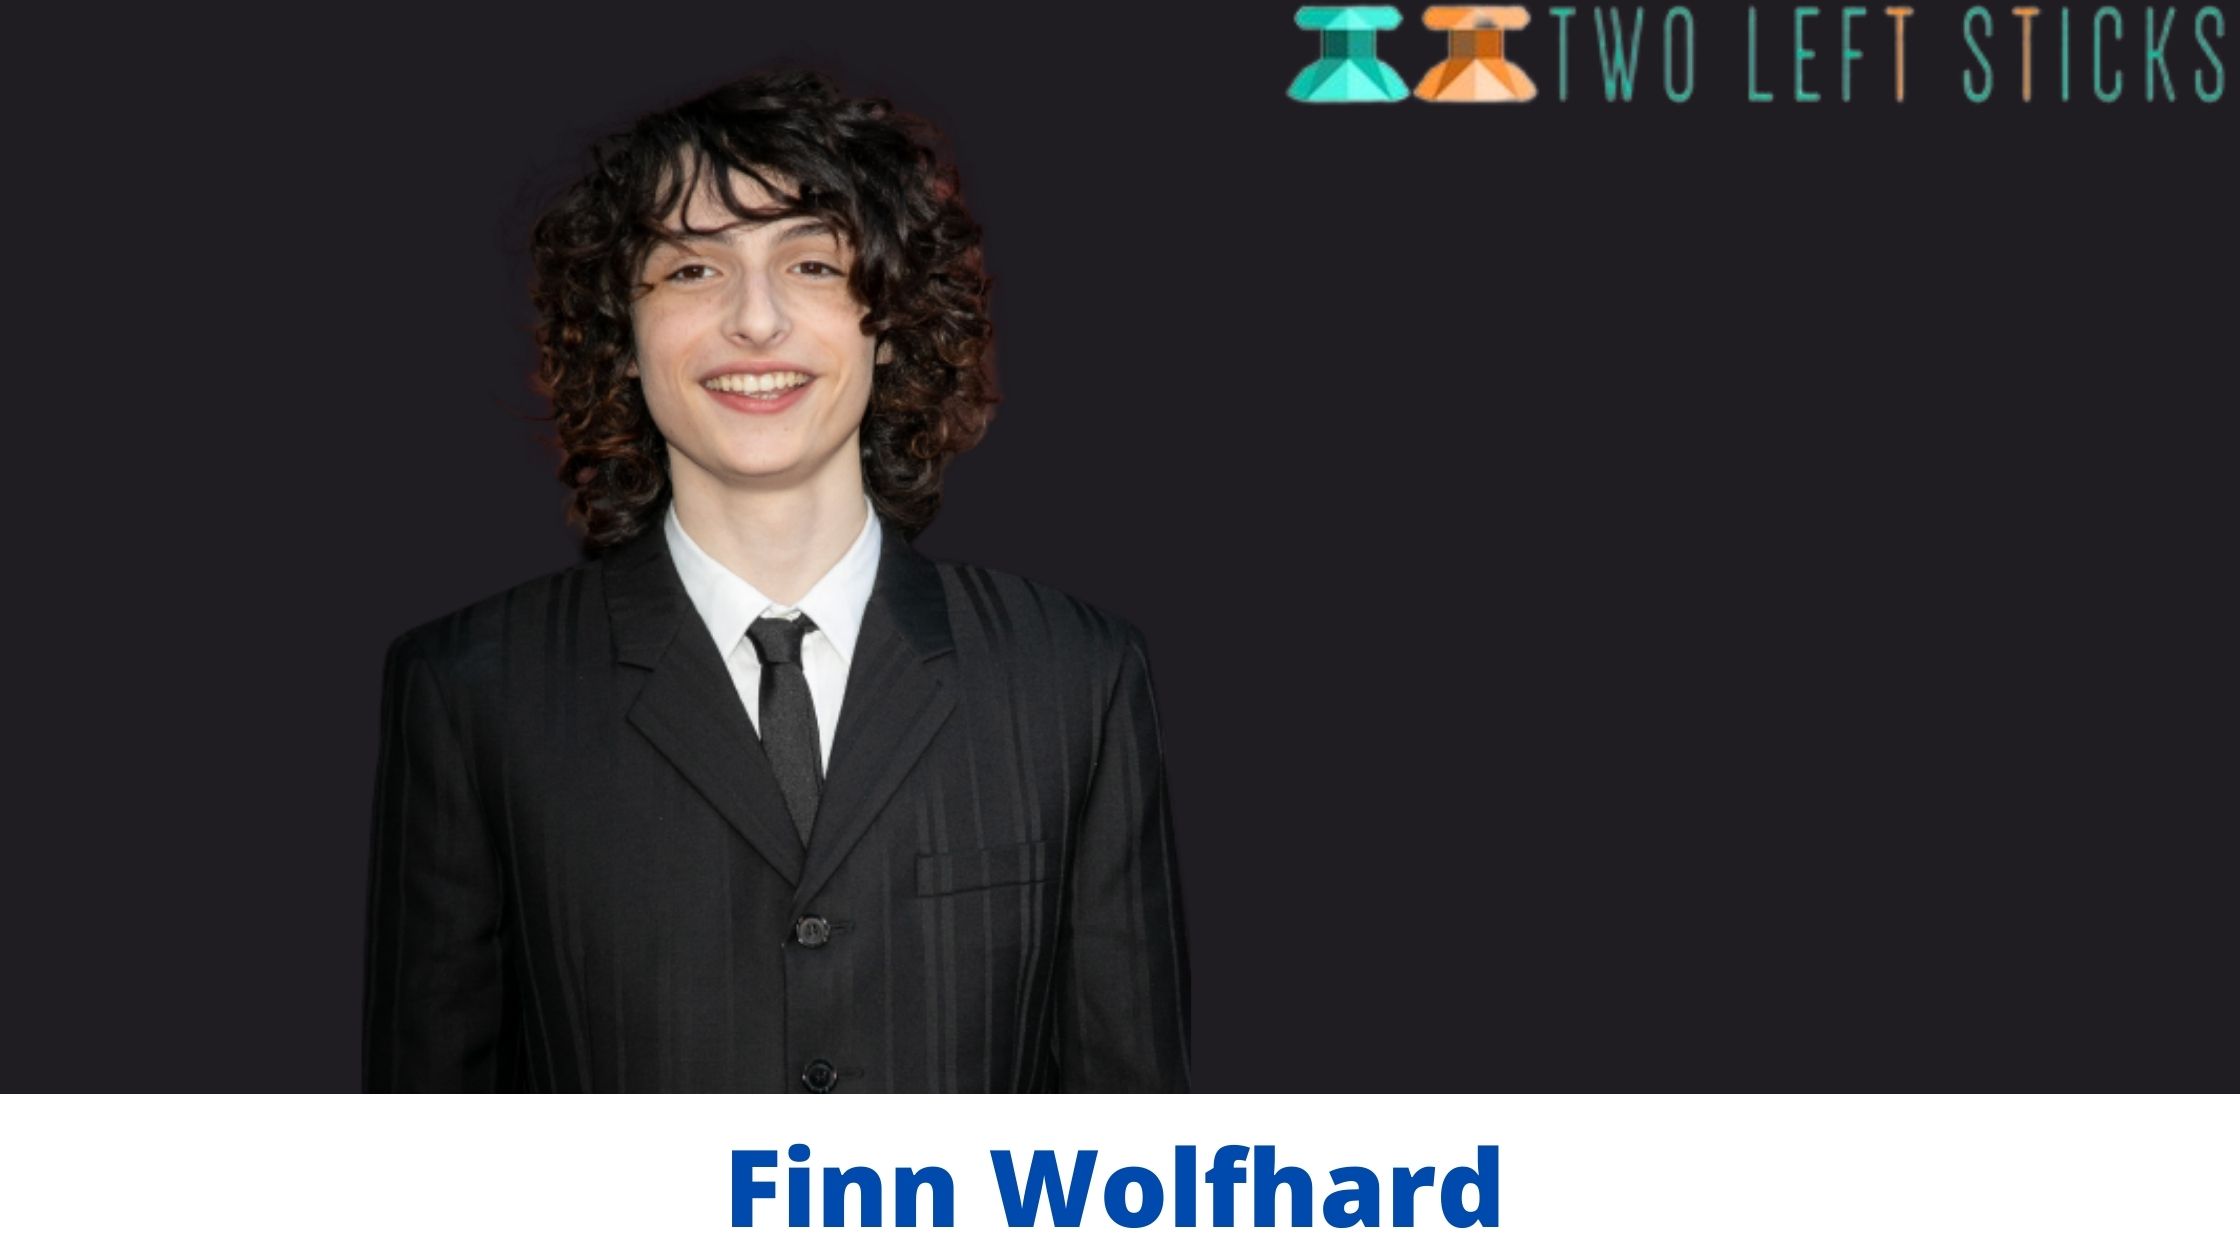 Finn Wolfhard Net Worth – How much money does he bring in per episode?